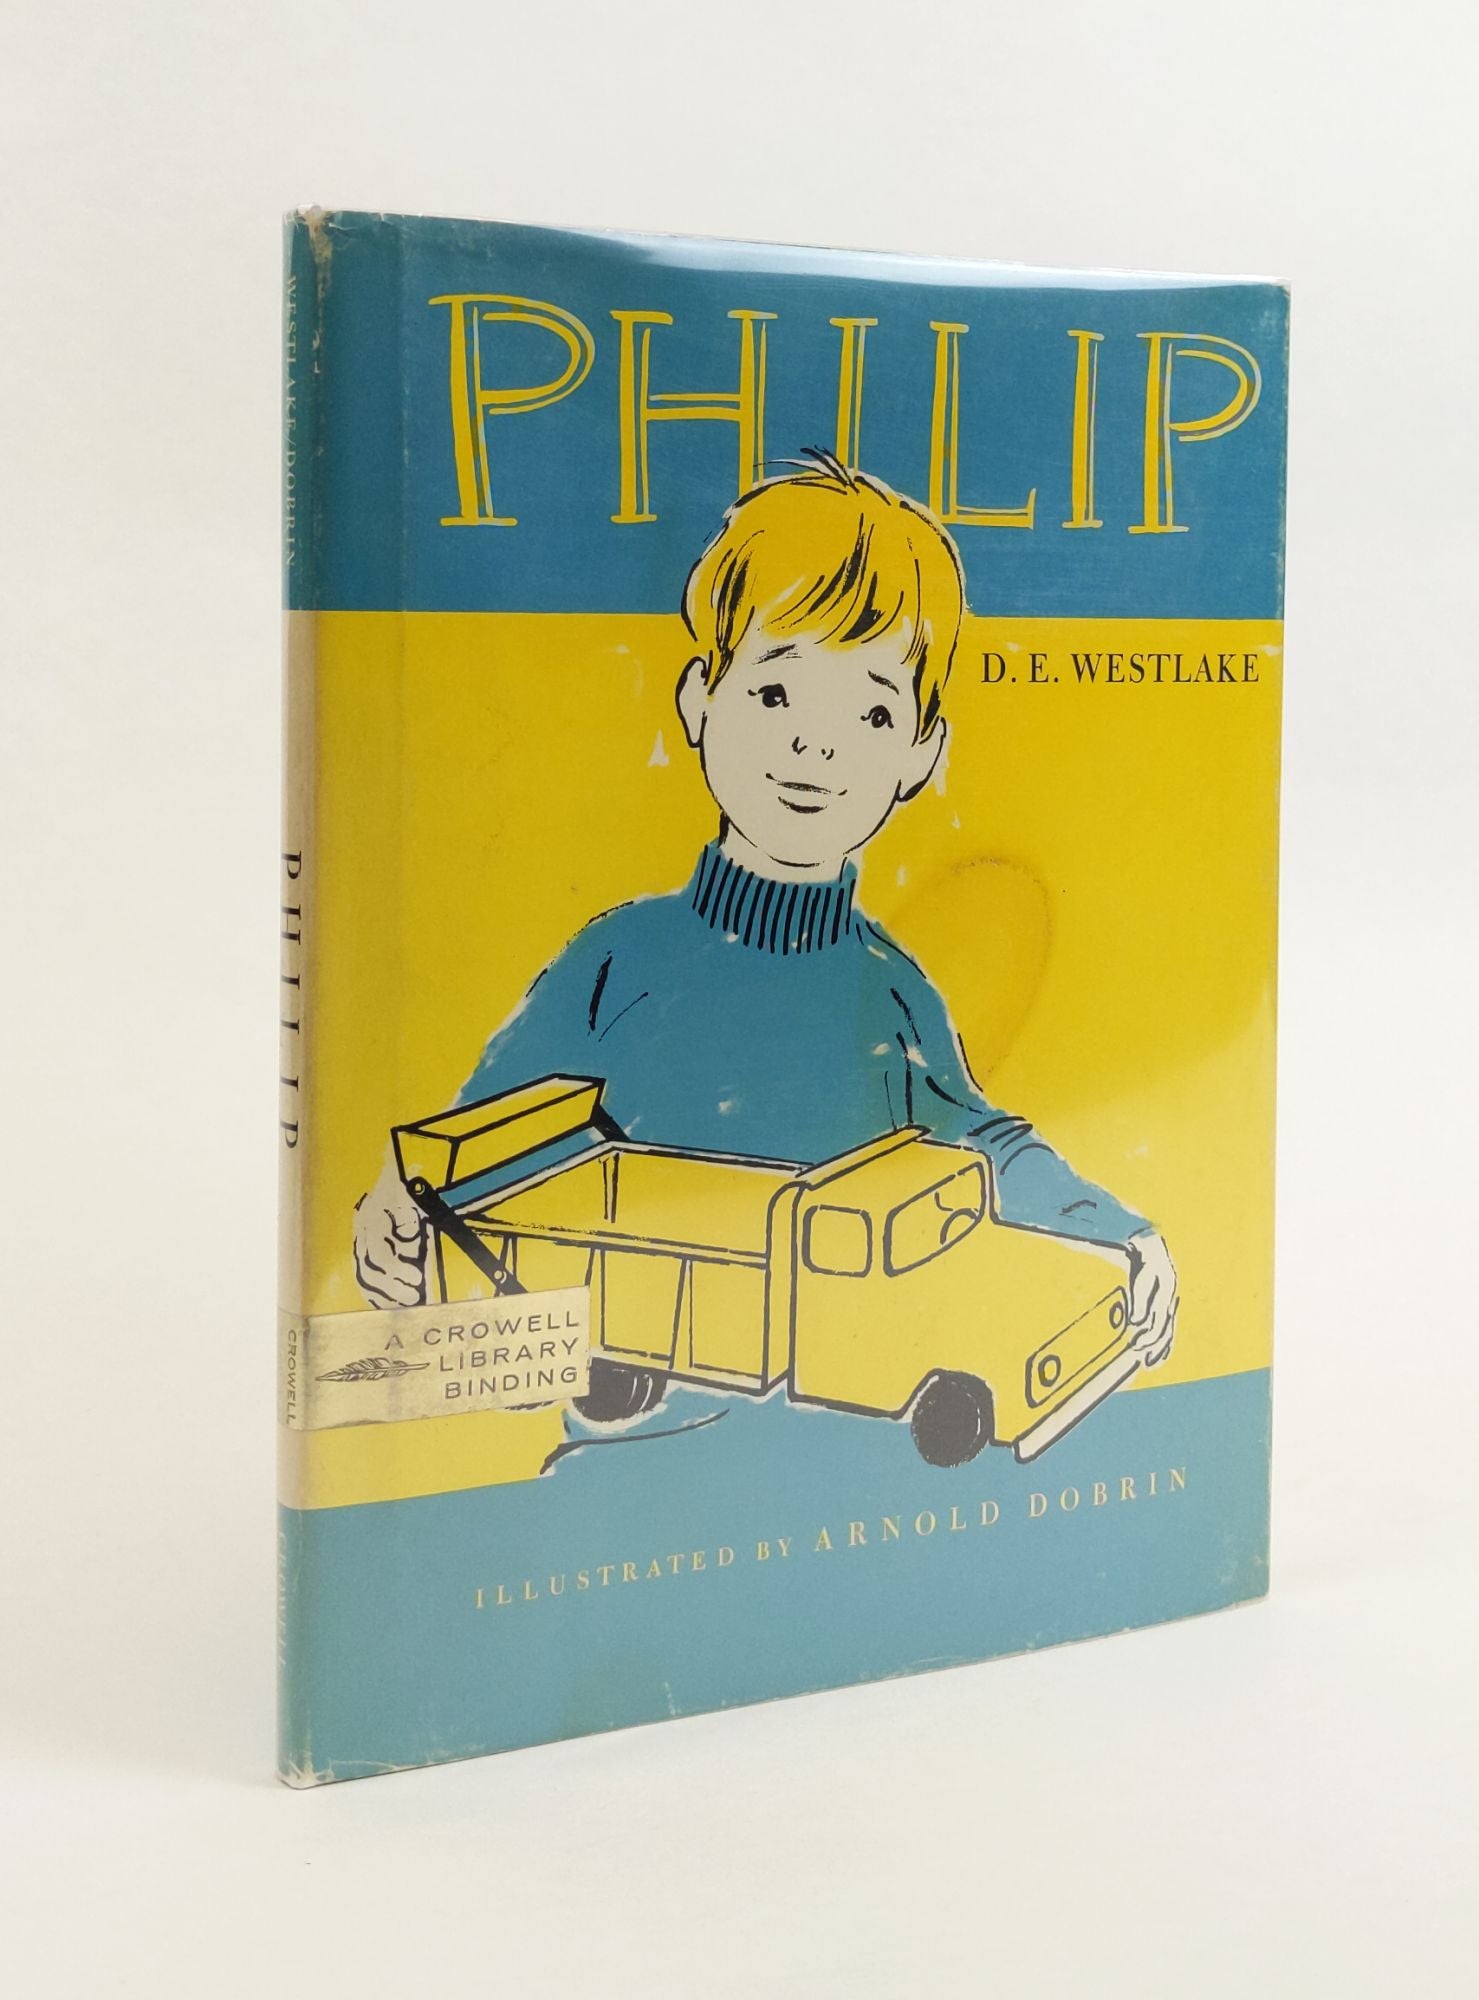 Product Image for PHILIP [Signed]